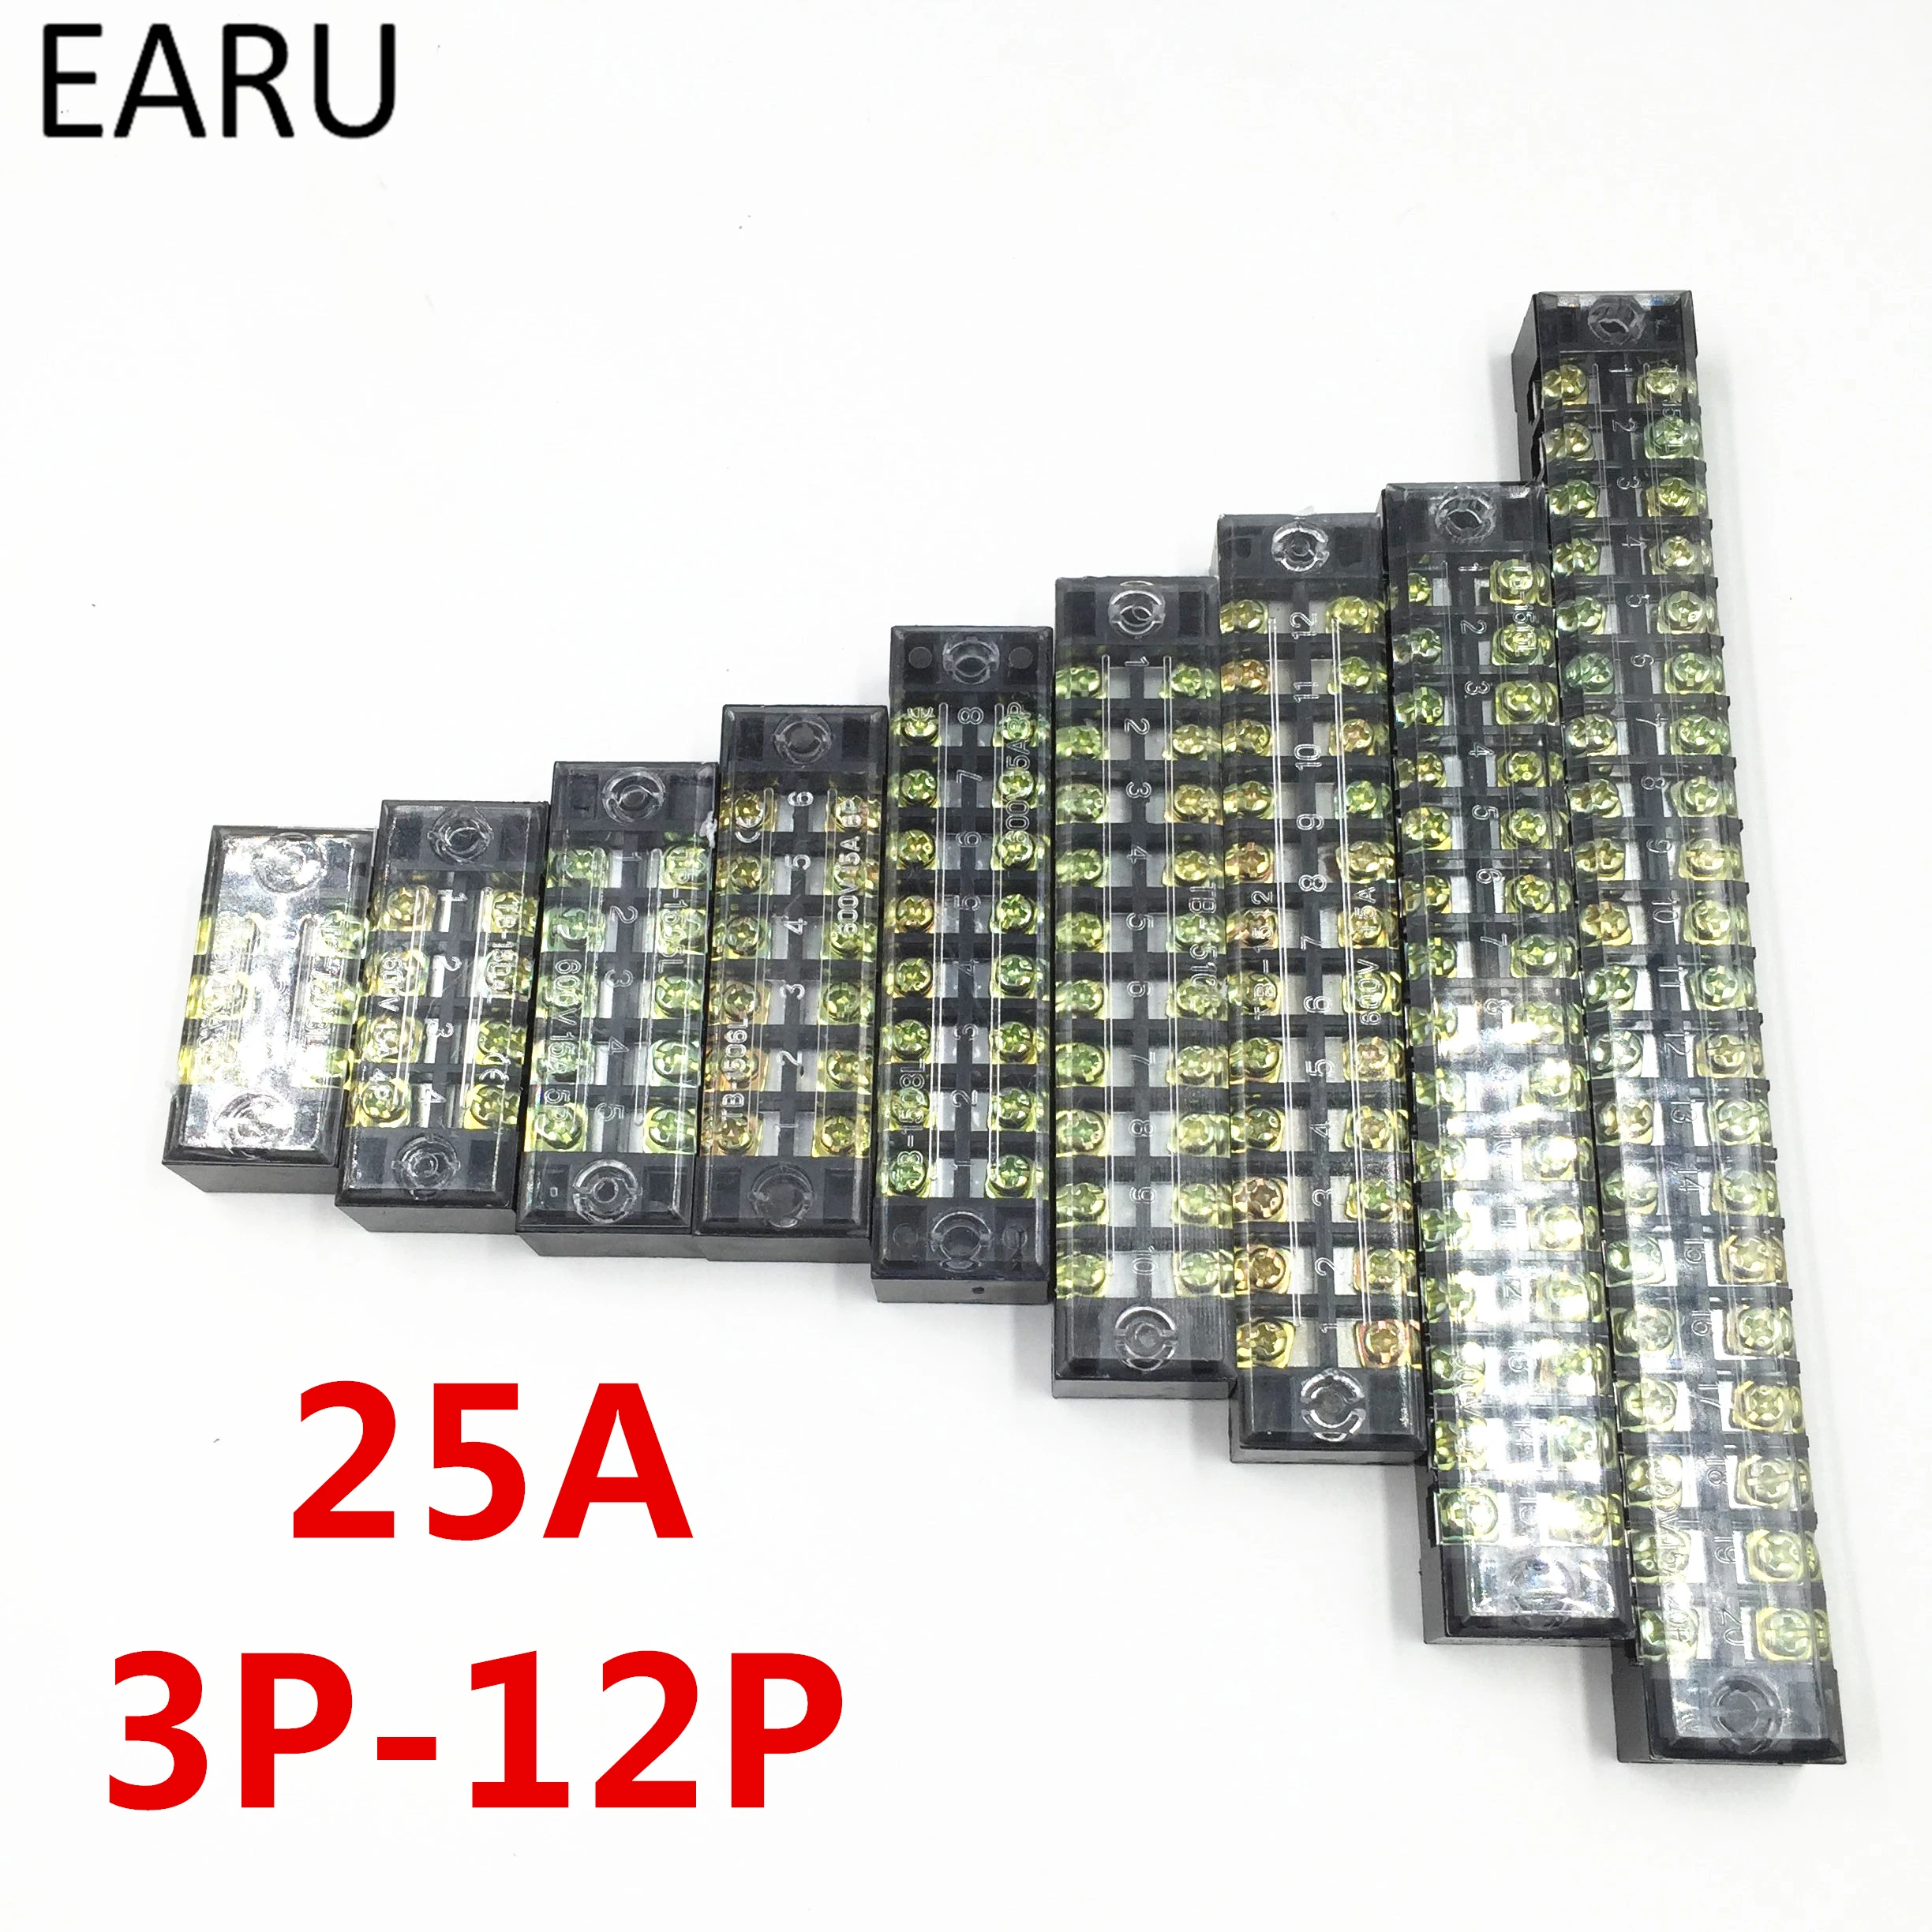 

1pc 25A 600V Dual Row Barrier Screw Terminal Block Wire Connector TB Series 3 4 5 6 8 10 12 Positions Ways Factory Wholesale